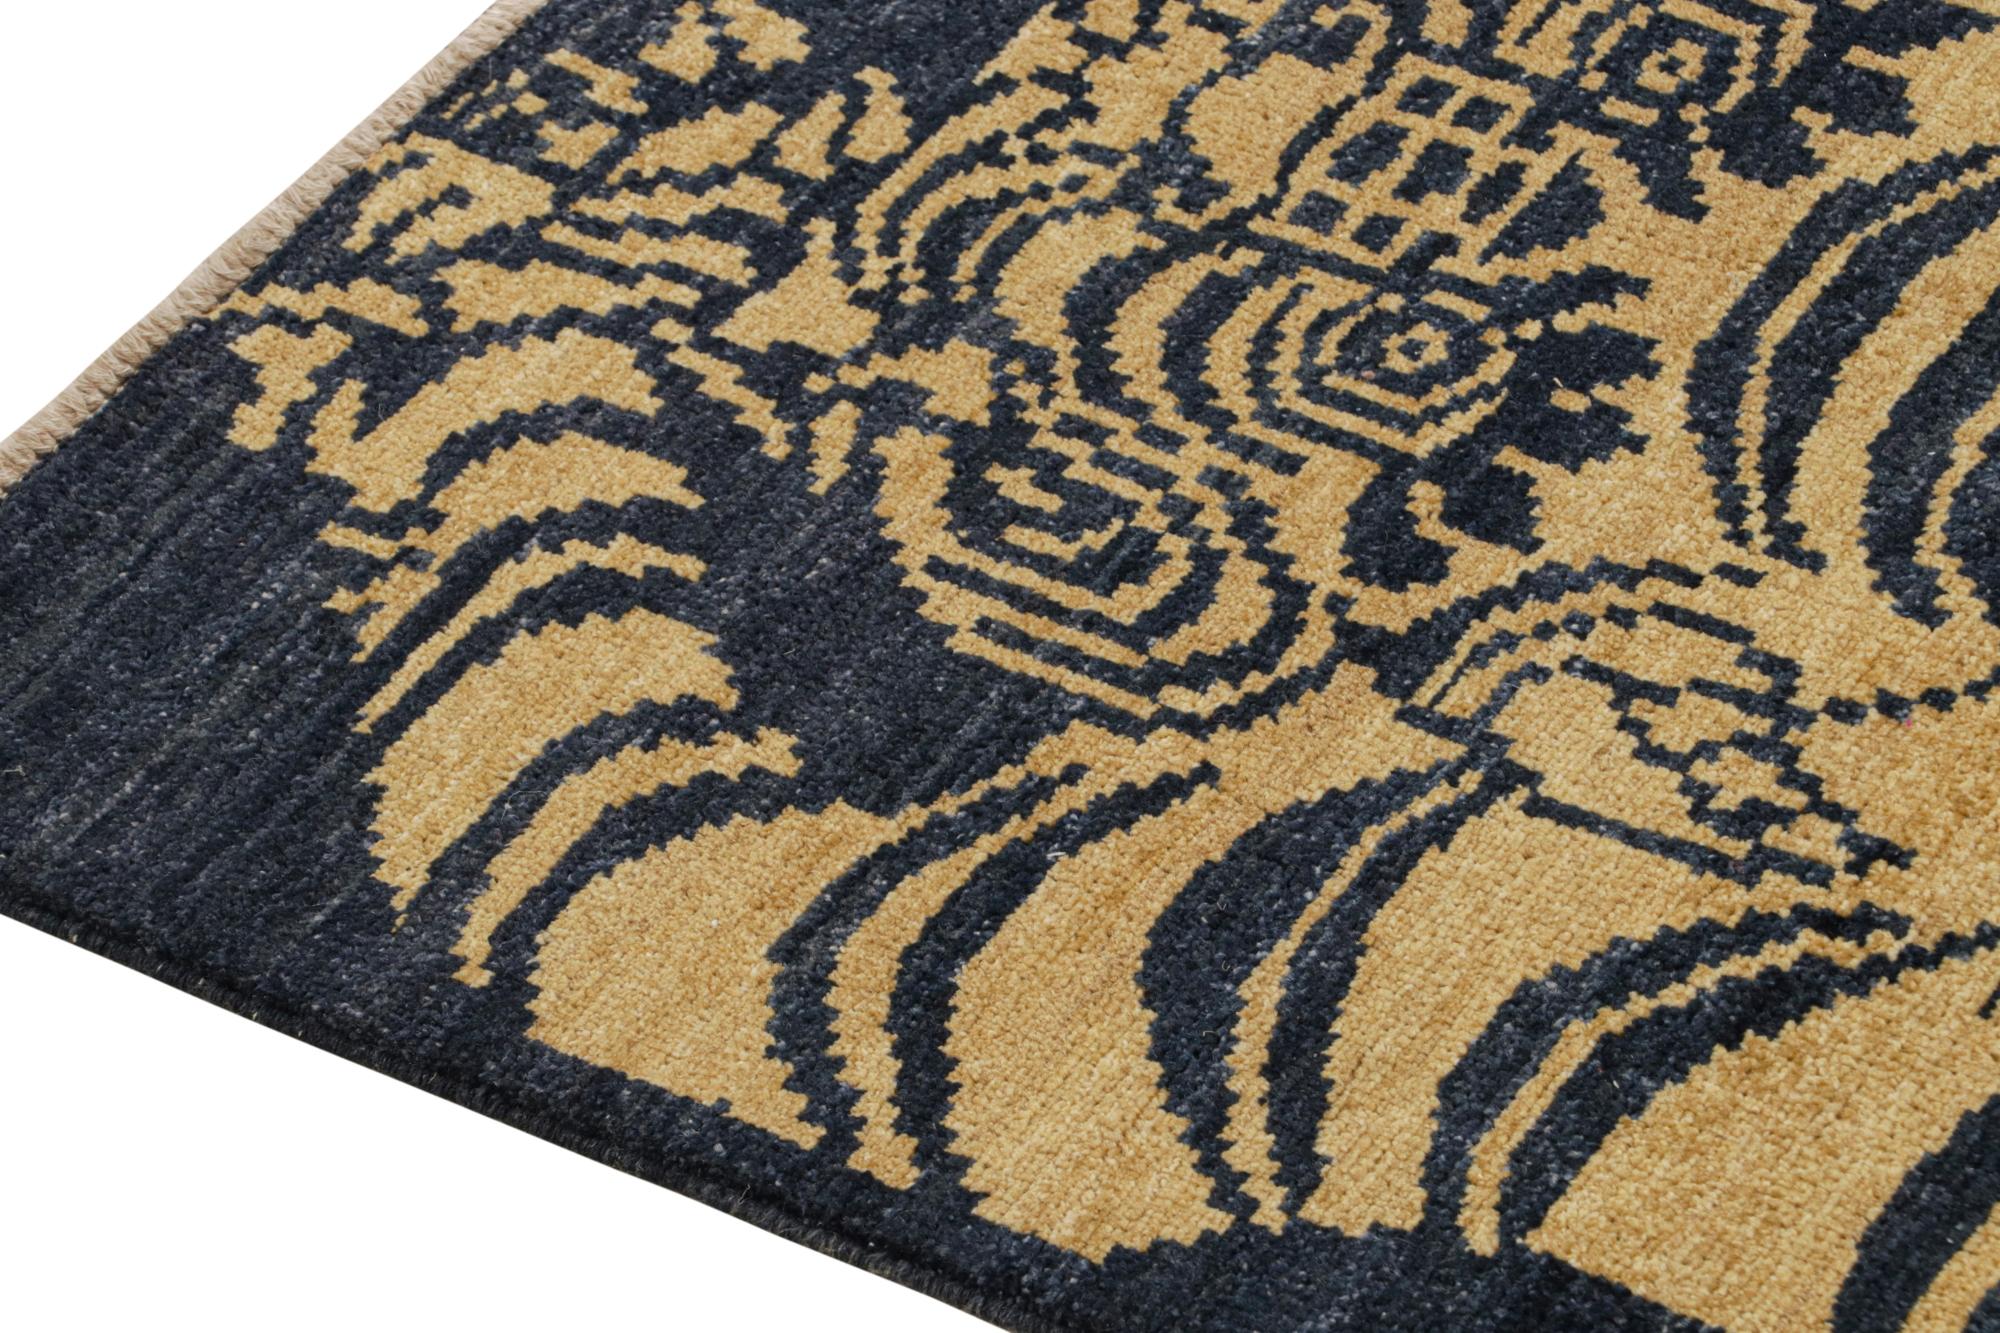 Tapis & Kilim's Classic Style Tiger Runner in Navy Blue and Gold Pictorial (en anglais) Neuf - En vente à Long Island City, NY